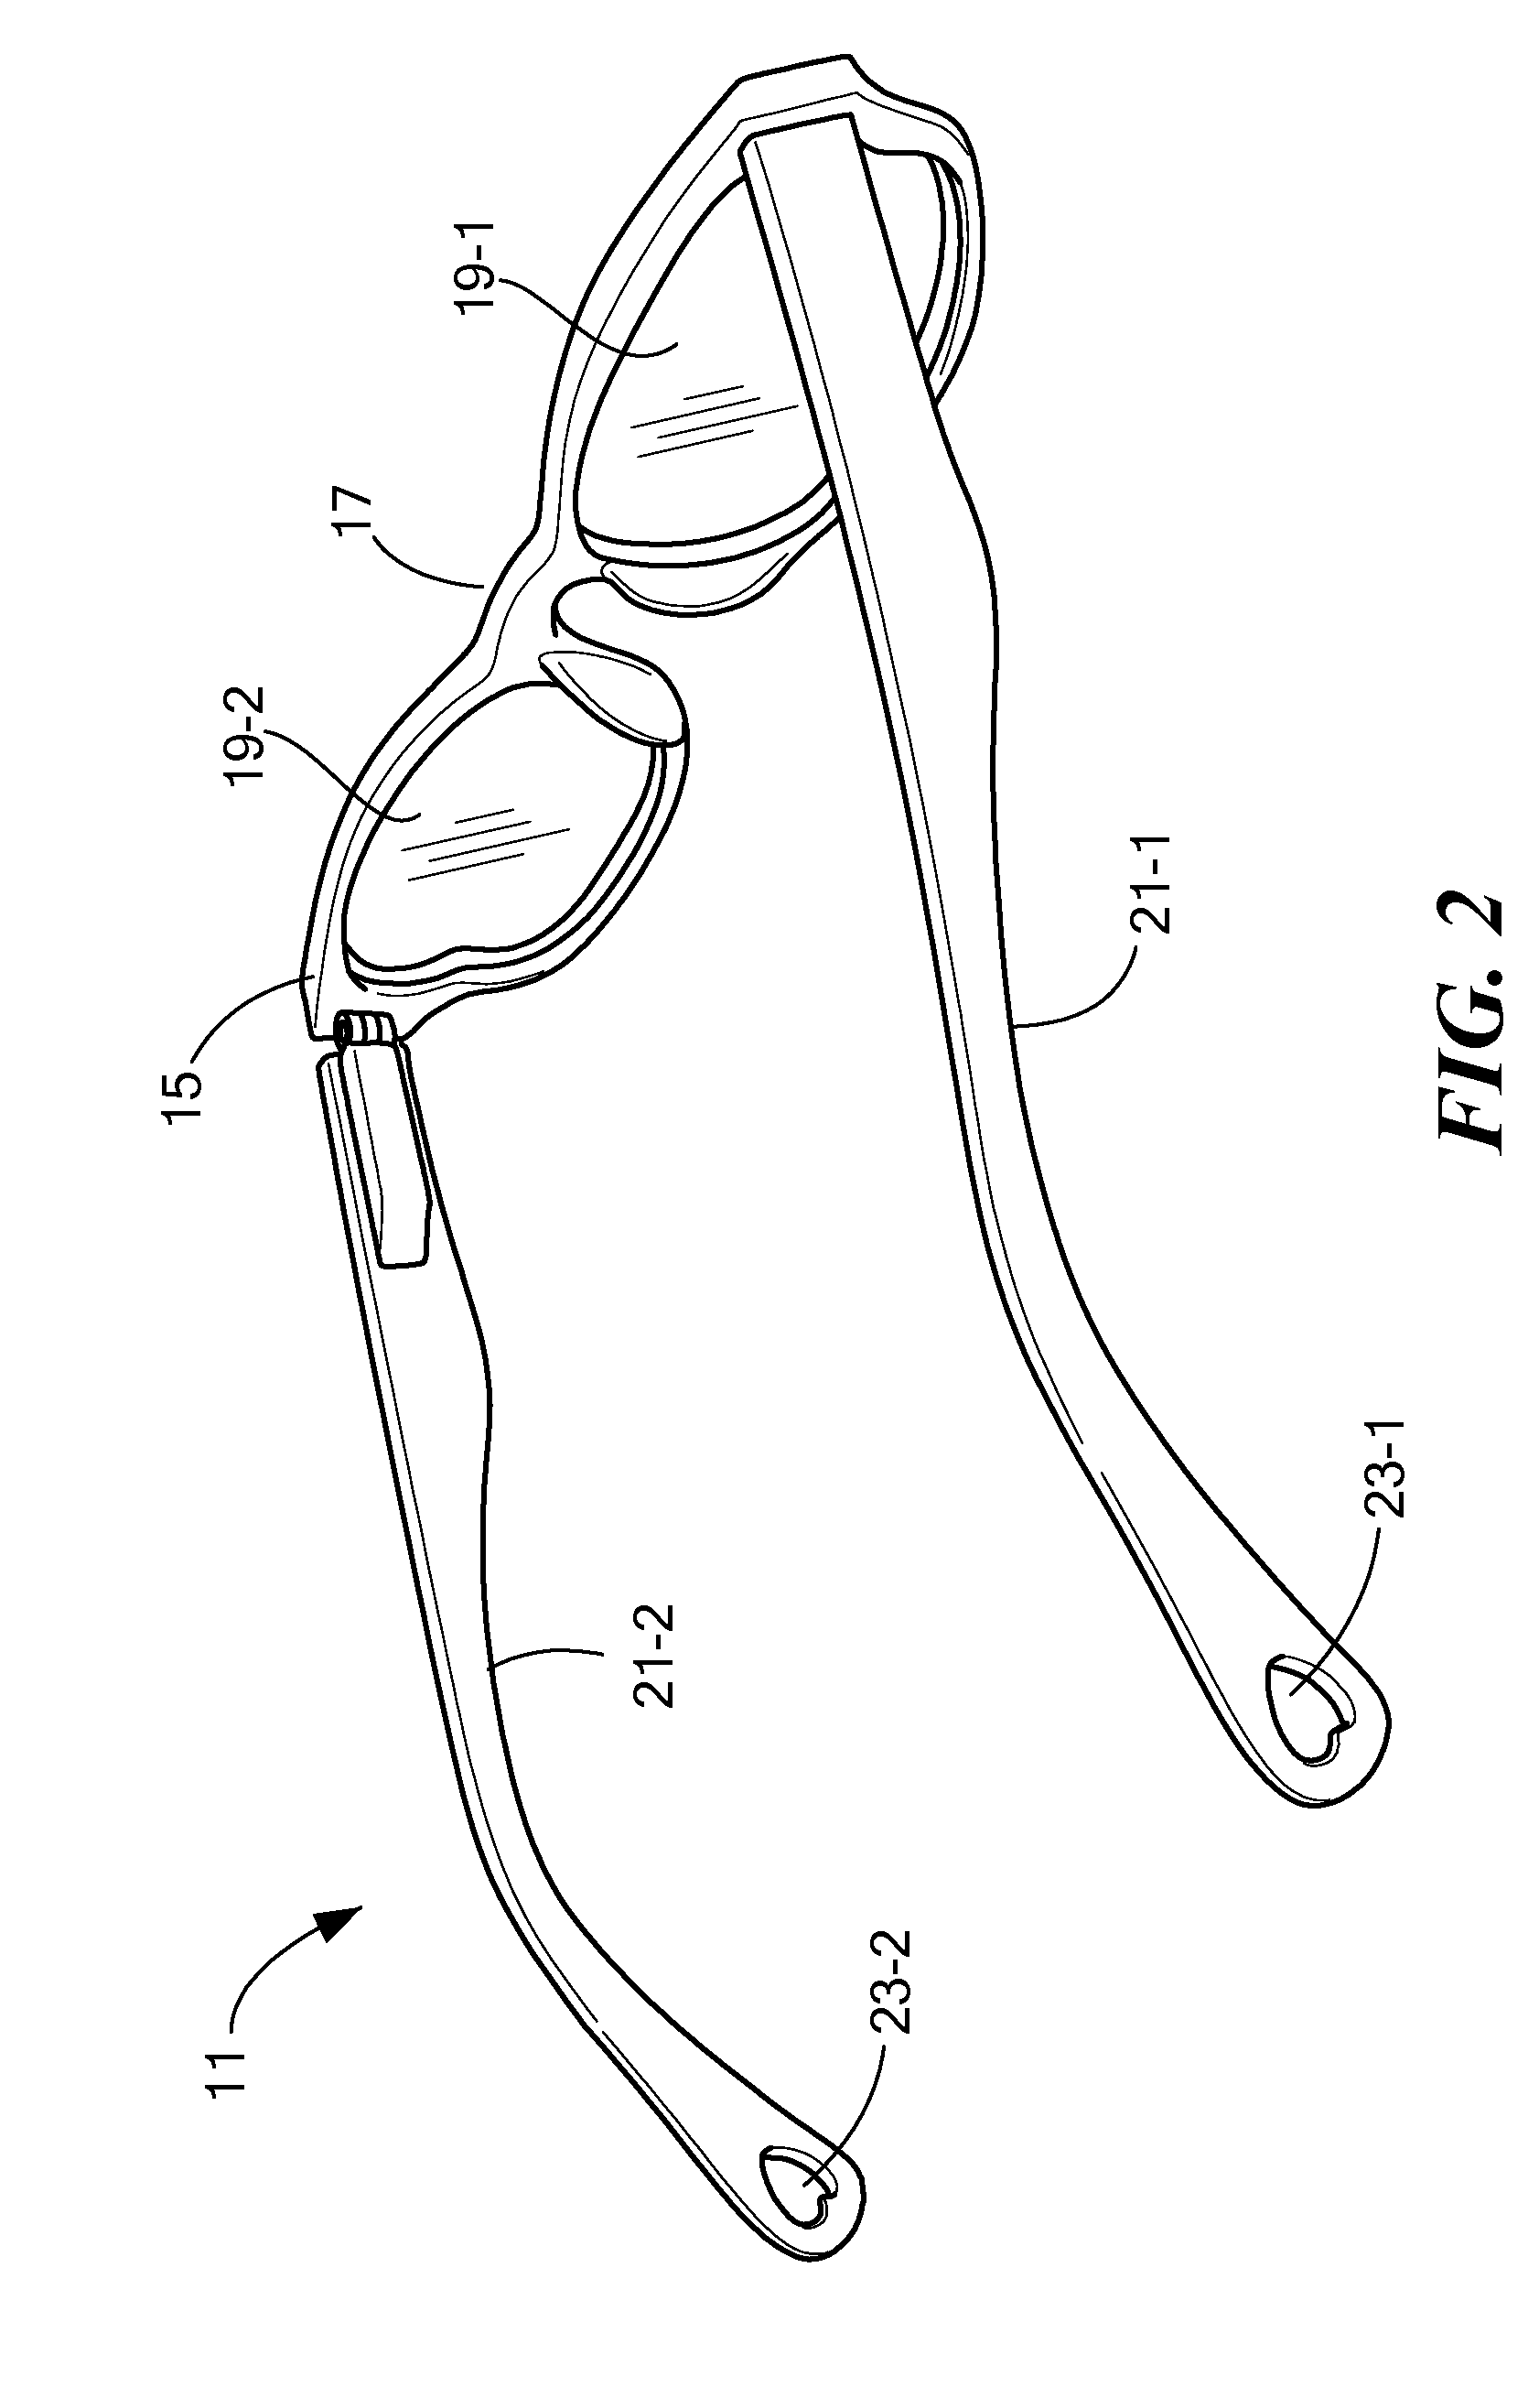 Eyeglasses and ornamental retainer for use in conjunction therewith